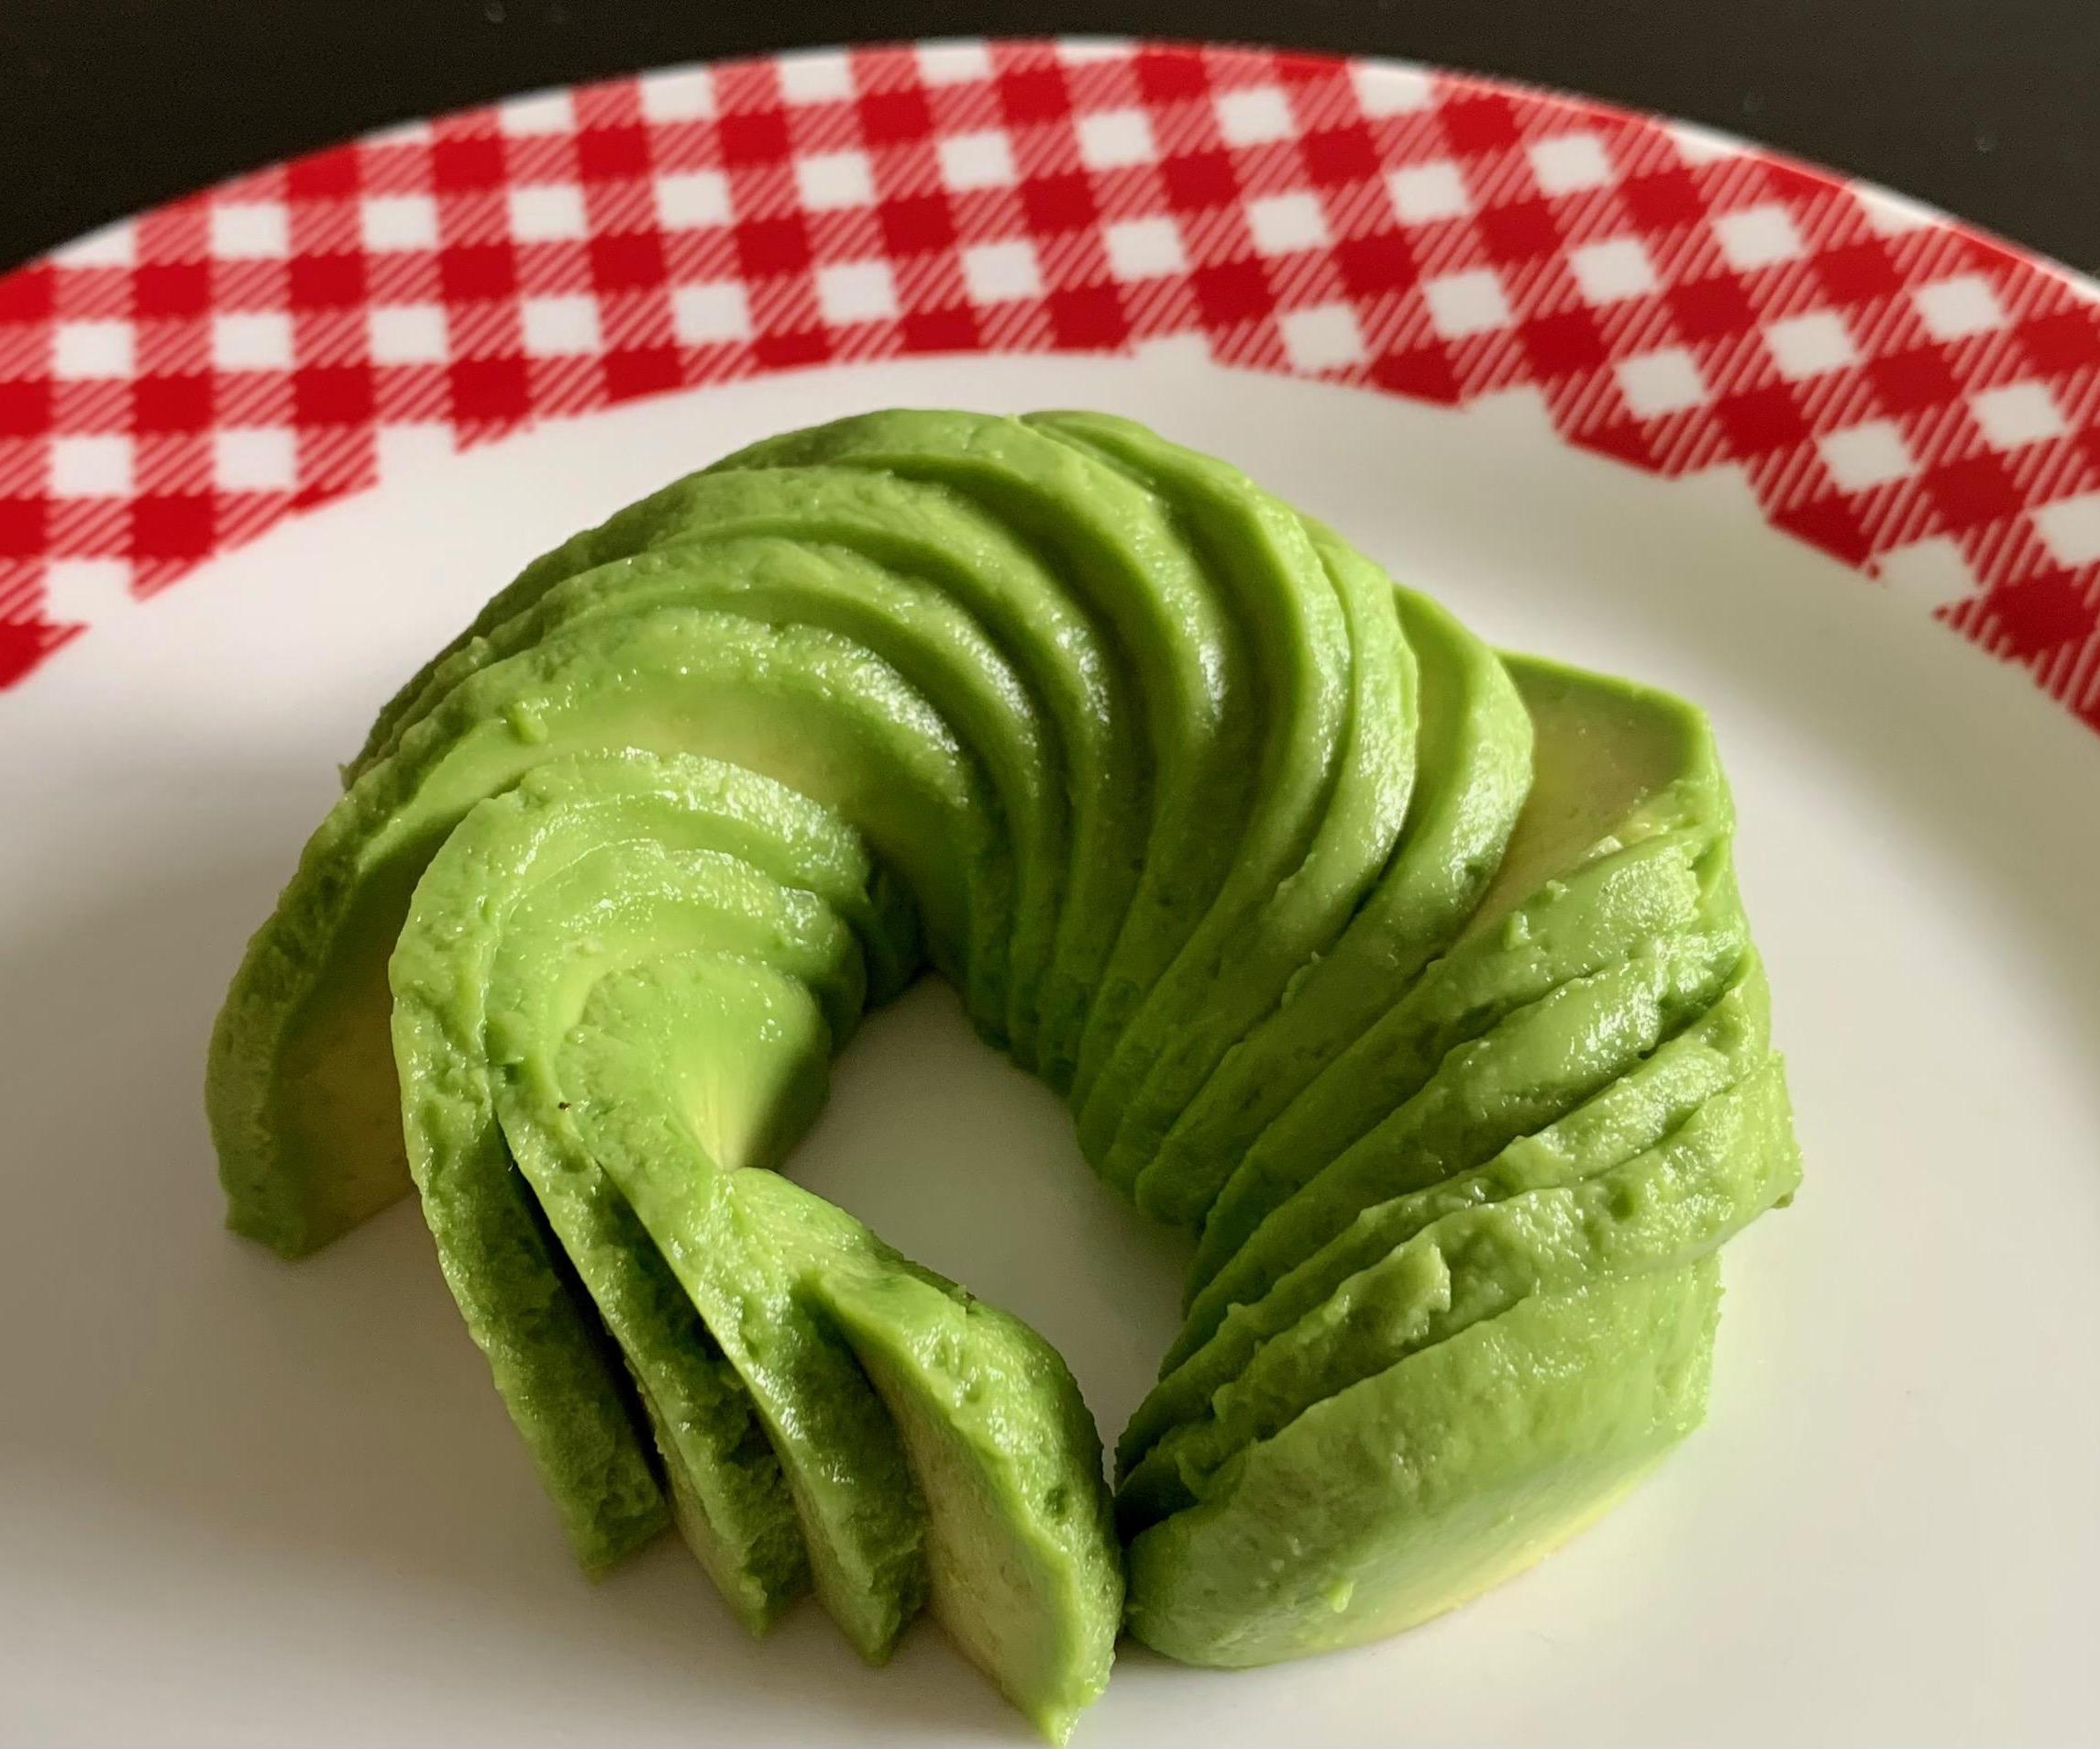 How to Cut an Avocado Easily and Safely